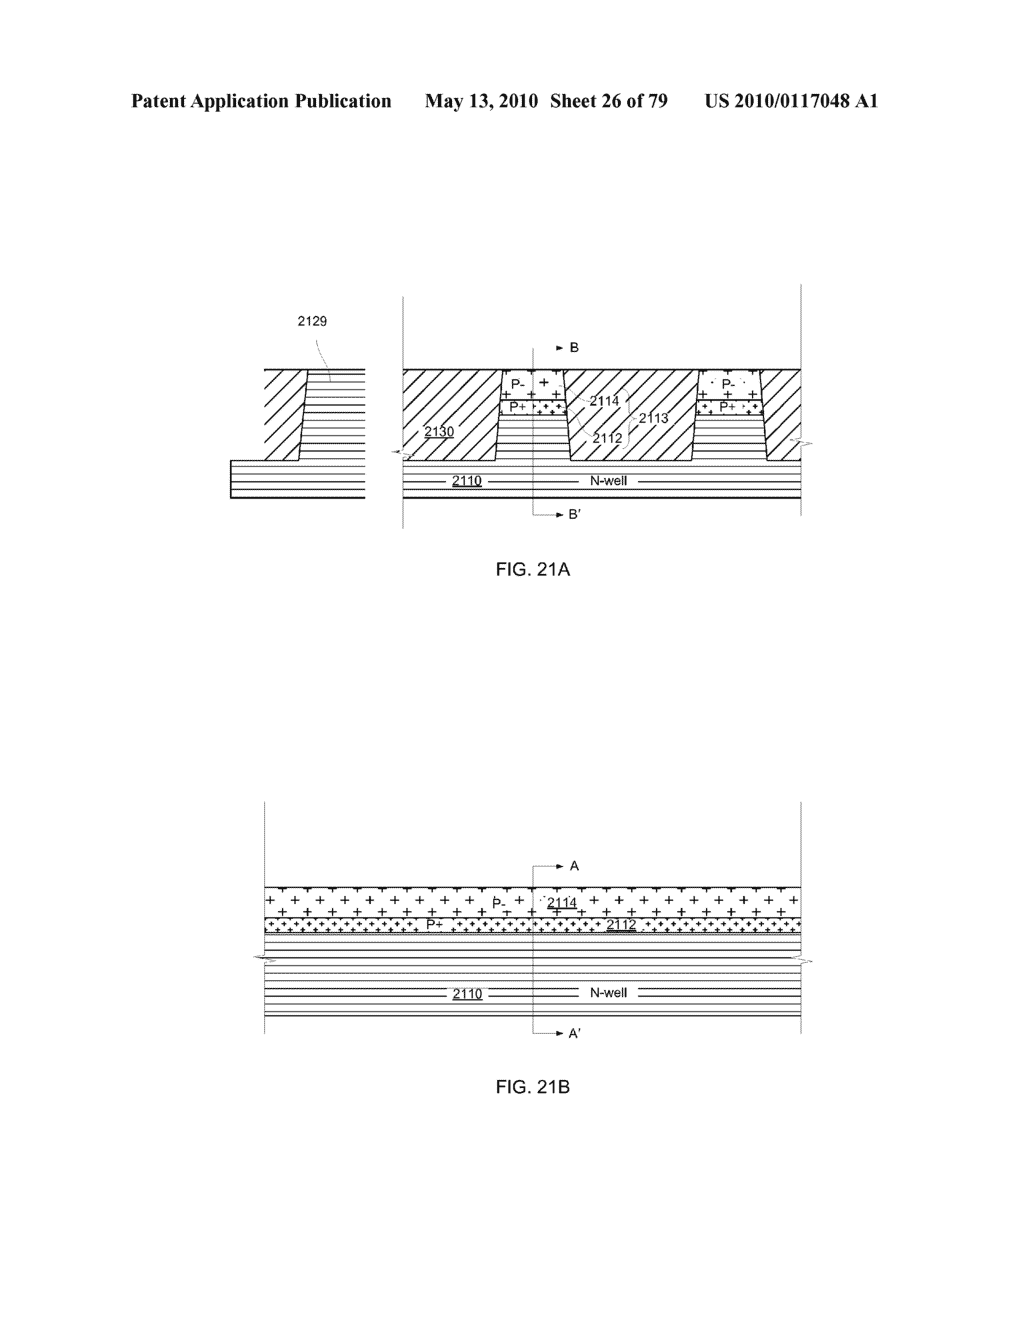 MEMORY CELL ACCESS DEVICE HAVING A PN-JUNCTION WITH POLYCRYSTALLINE AND SINGLE-CRYSTAL SEMICONDUCTOR REGIONS - diagram, schematic, and image 27